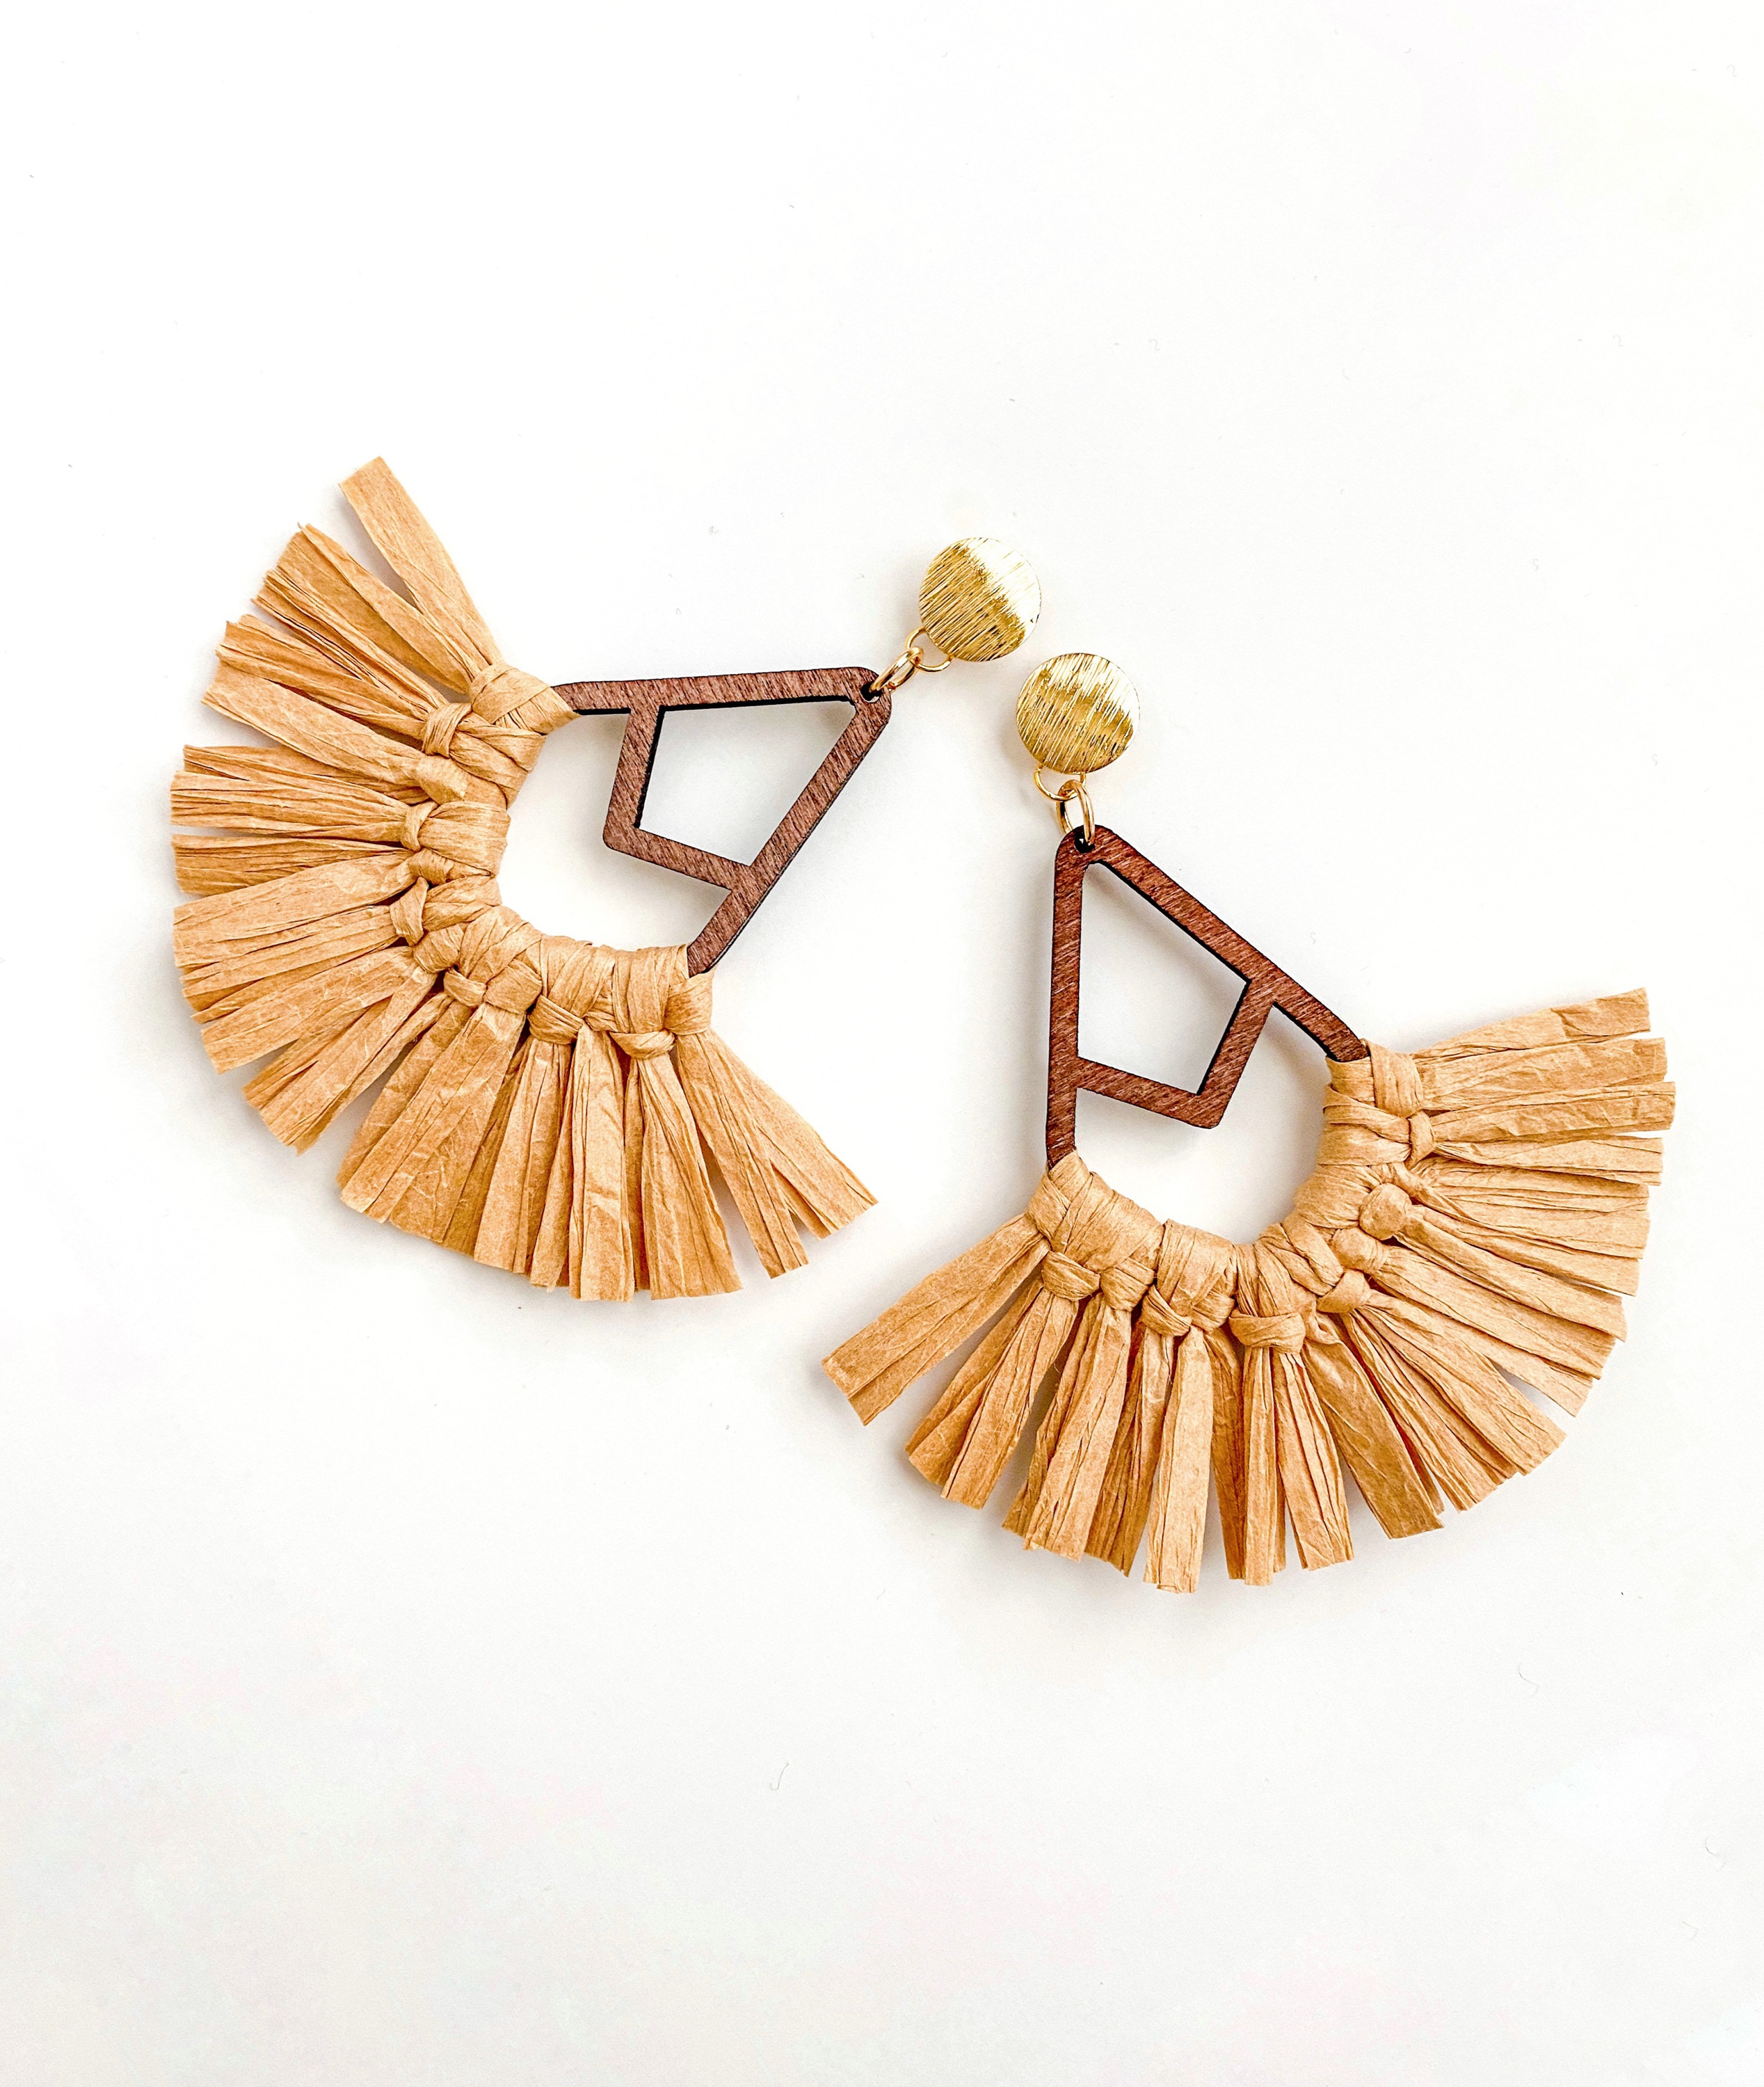 Tulum Wood and Raffia statement earrings, raffia earrings, fringe statement earrings, vacation accessories, best earrings of 2021, best statement earrings, budget friendly accessories